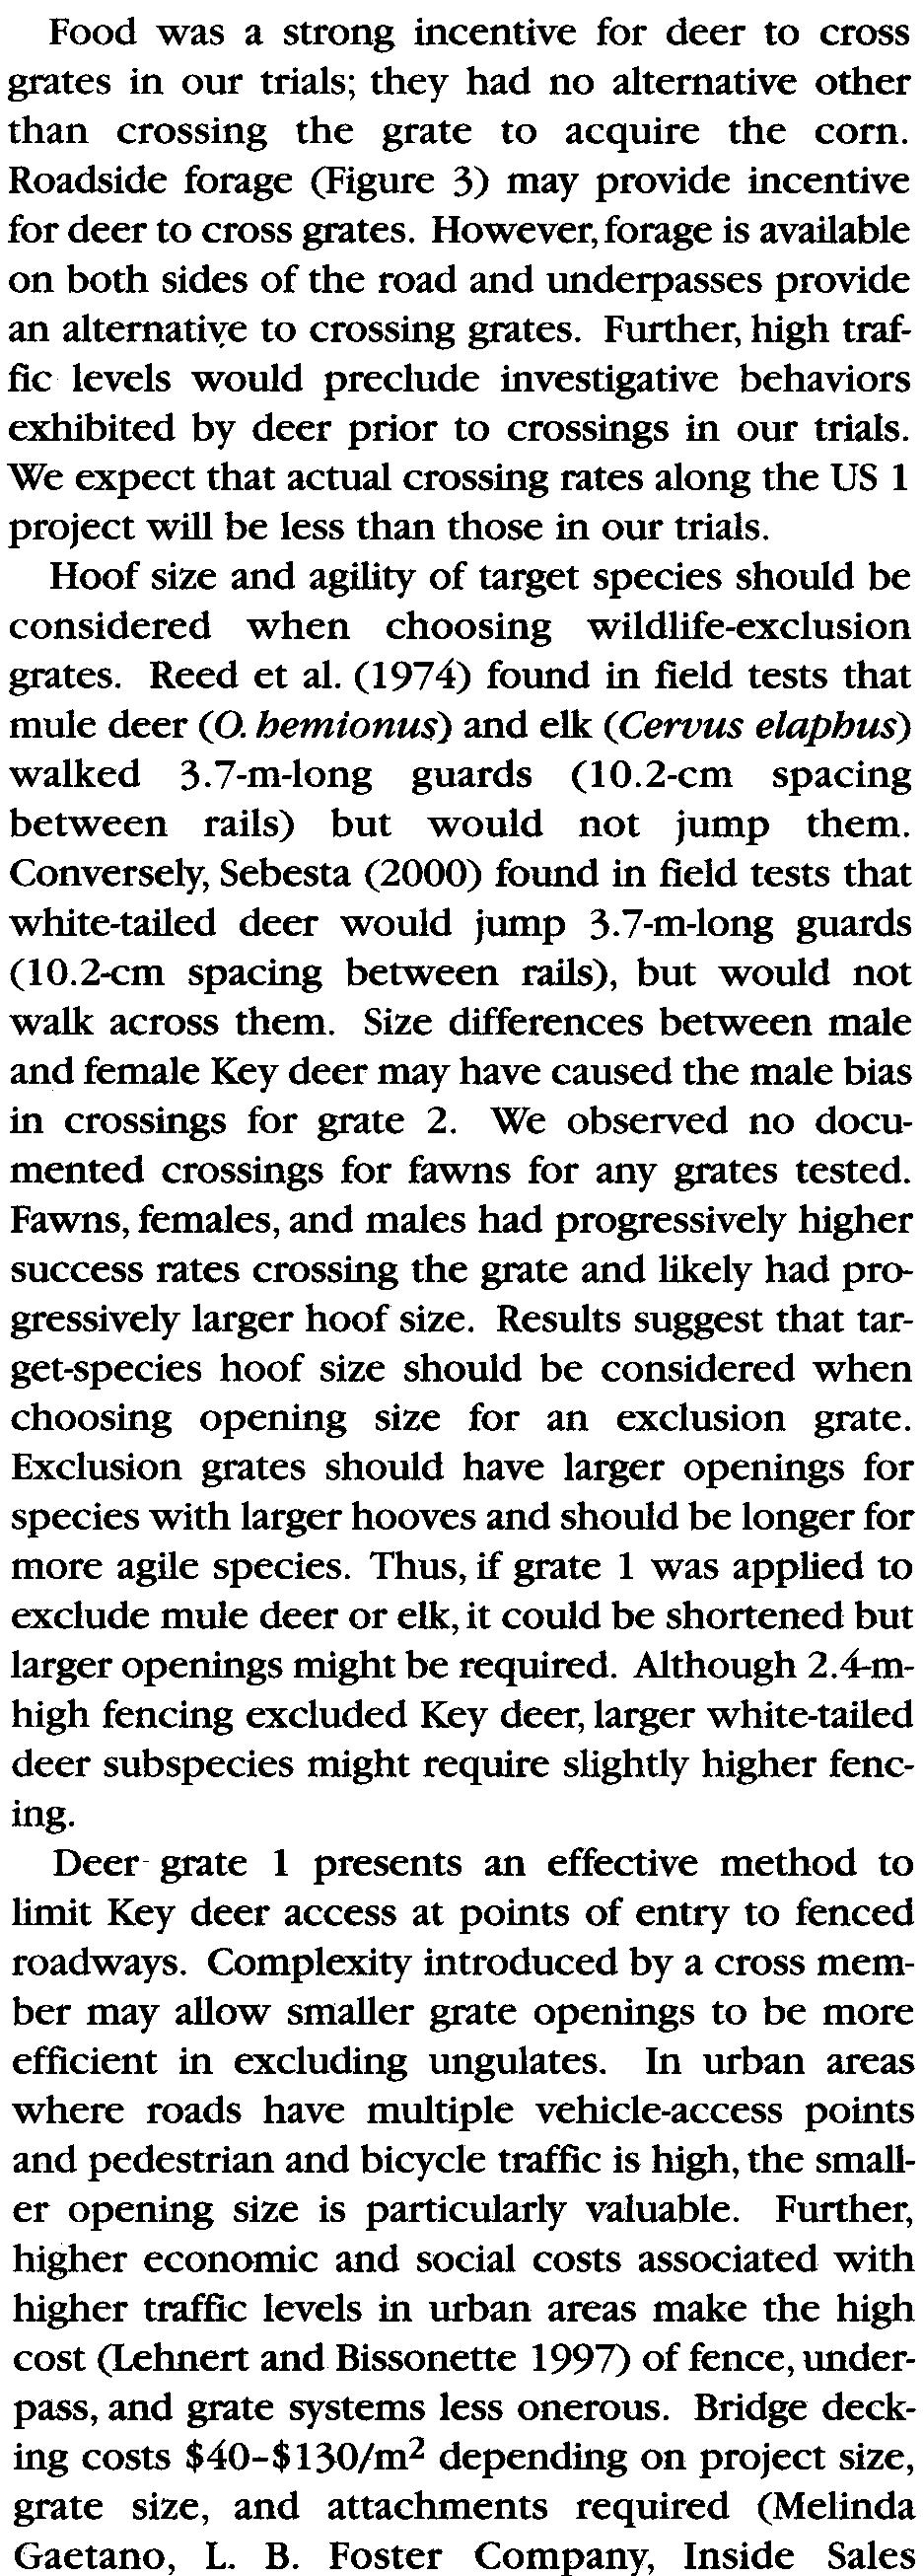 We expect that actual crossing rates along the US 1 project will be less than those in our trials. Hoof size and agility of target species should be considered when choosing wildlife-exclusion grates.